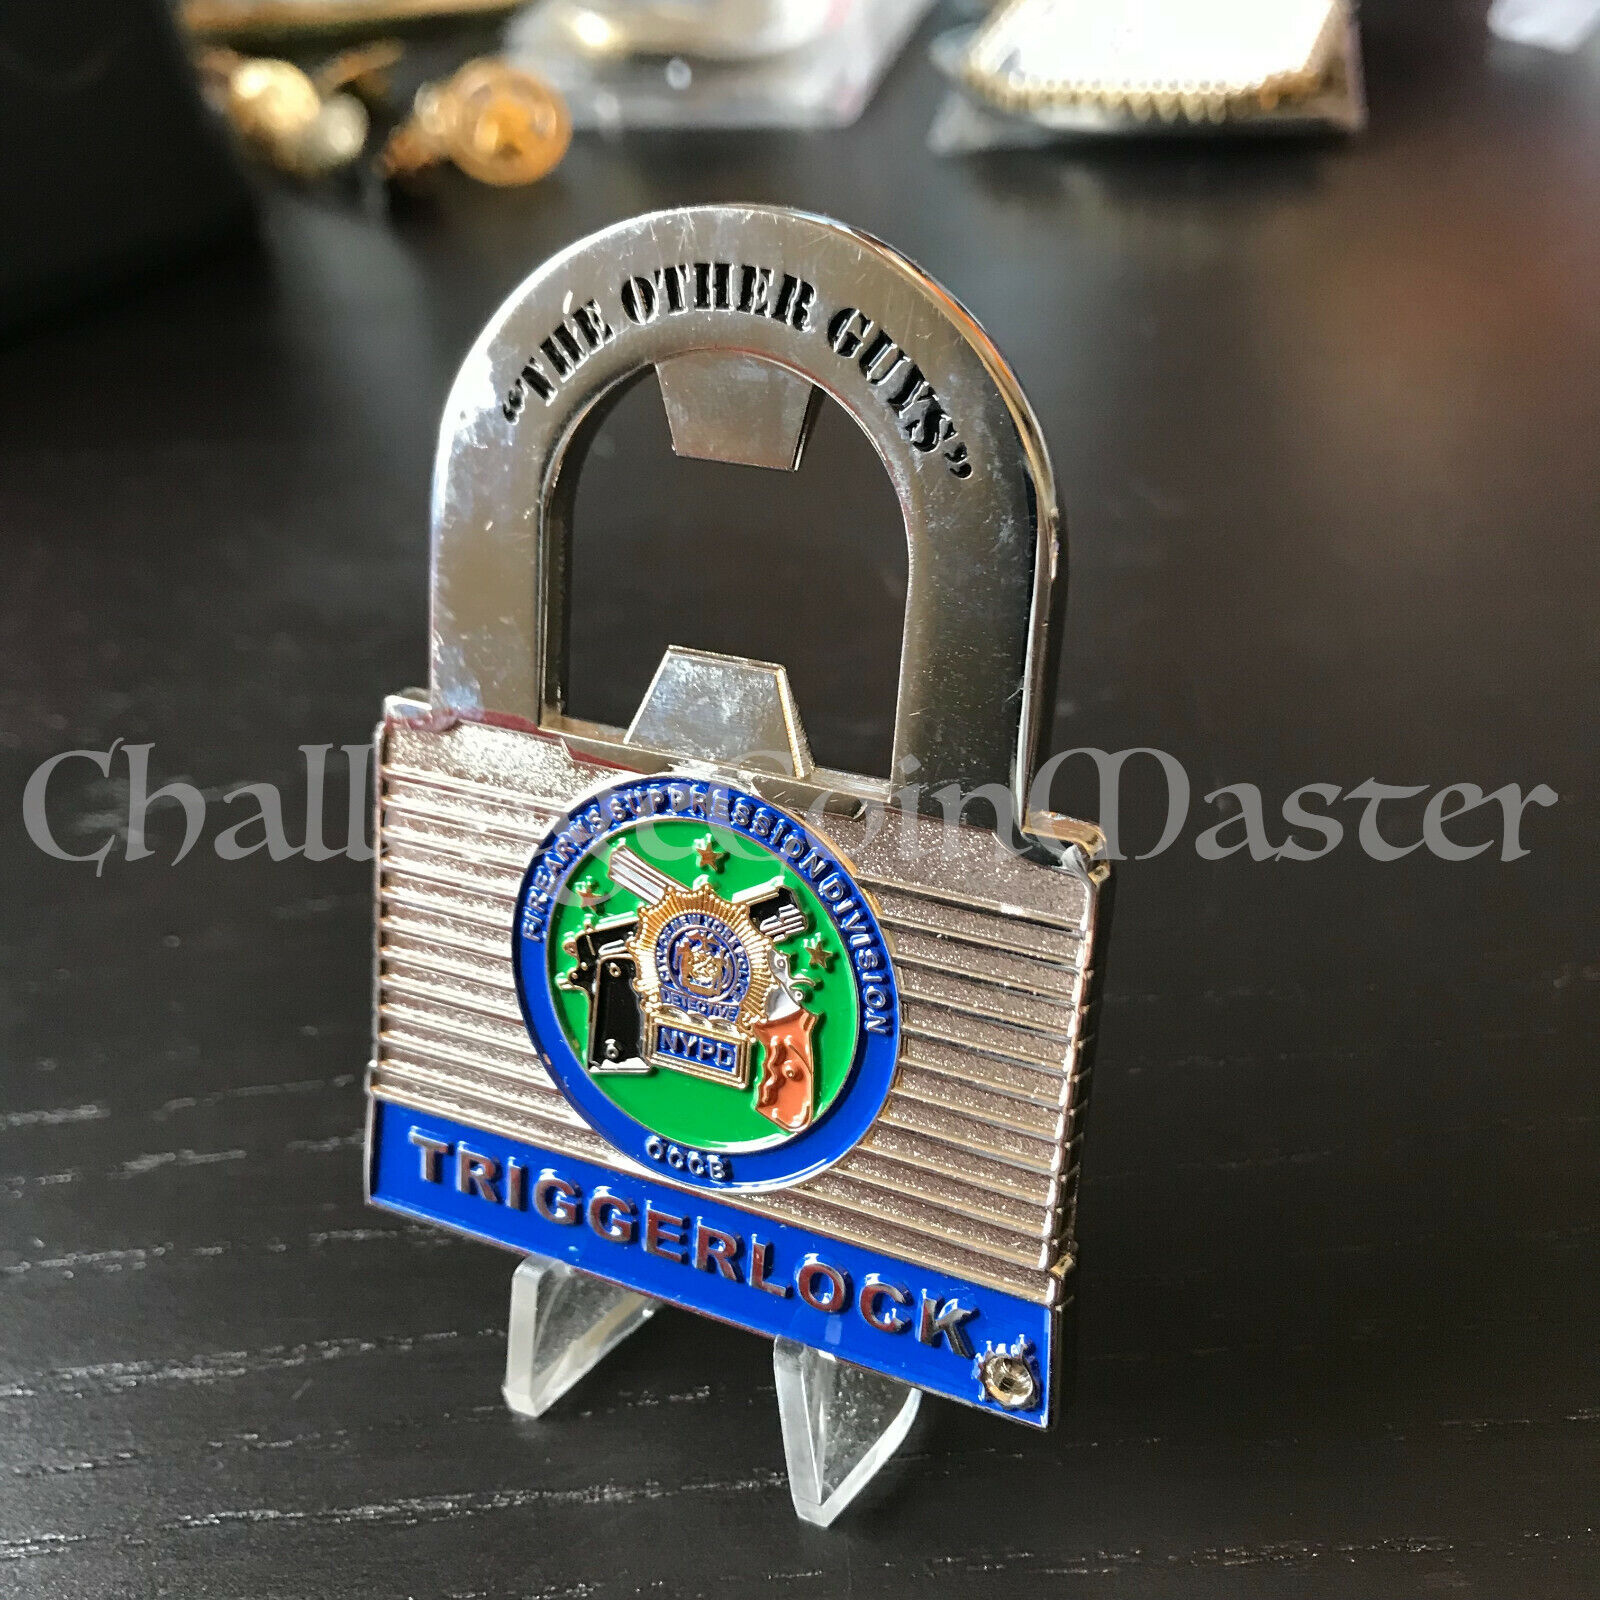 C56 NYPD TRIGGERLOCK FIREARMS SUPPRESSION DIVISION POLICE CHALLENGE COIN. 